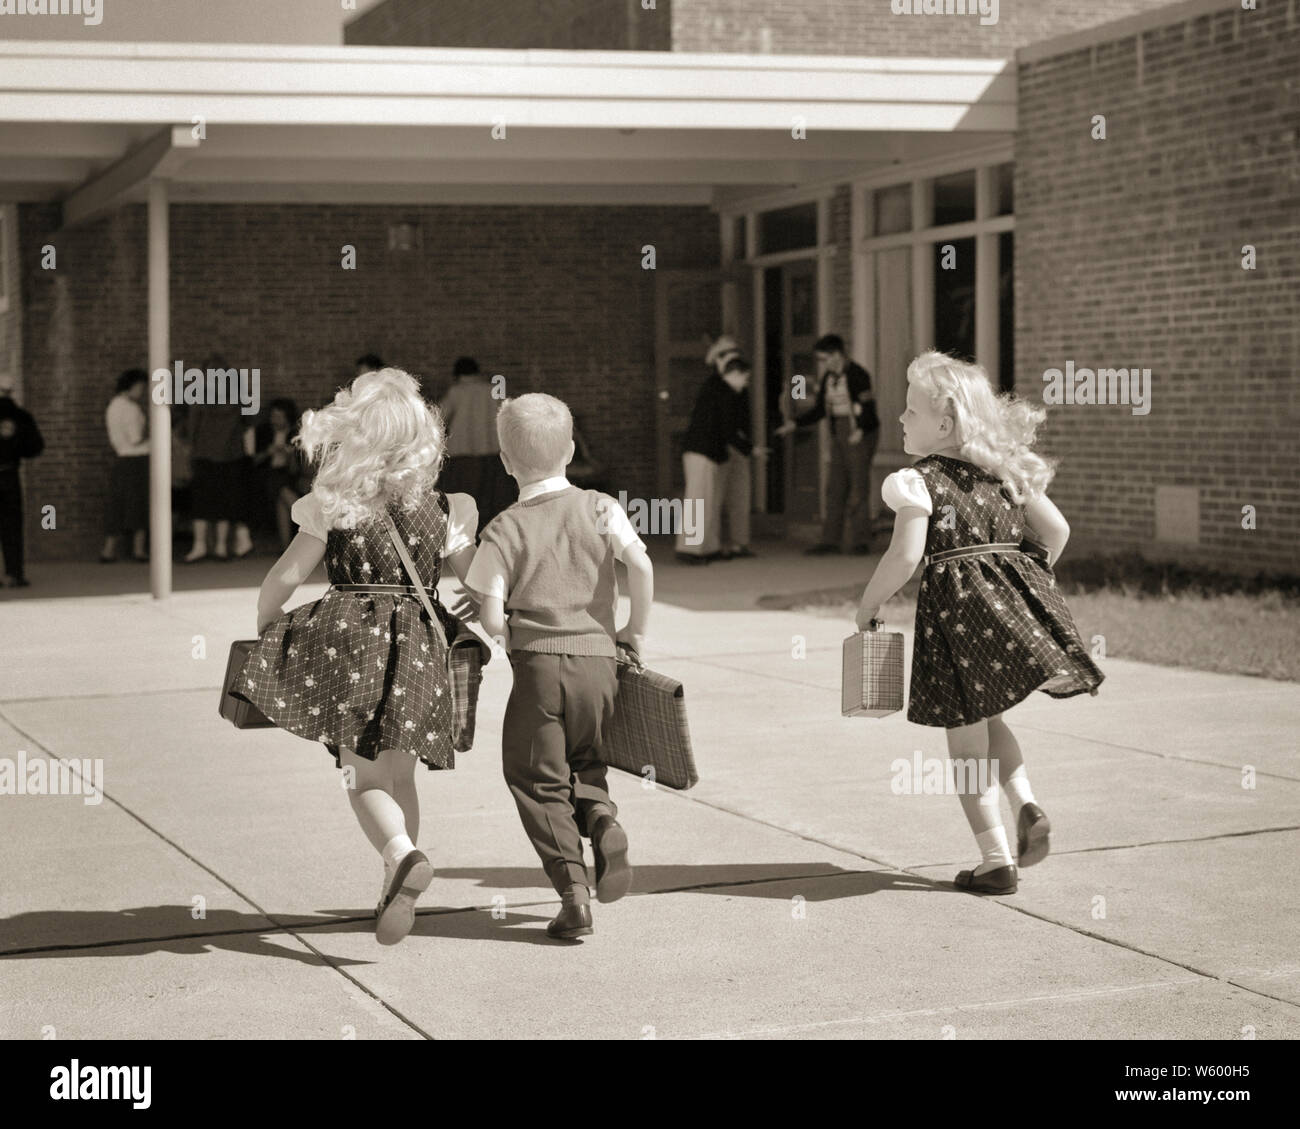 1950s BOY AND TWO TWIN GIRLS RUNNING TO SCHOOL ENTRANCE BACK VIEW CARRYING LUNCH BOXES BOOK BAGS GIRLS WEARING MATCHING DRESSES - s6894 HAR001 HARS FRIEND TEAMWORK TWIN IDENTICAL DOUBLE JOY LIFESTYLE FEMALES BROTHERS COPY SPACE FRIENDSHIP FULL-LENGTH MATCH MALES SIBLINGS SISTERS B&W LATE DRESSES MATCHING SAME SCHOOLS GRADE AND EXCITEMENT KNOWLEDGE REAR VIEW PRIMARY SIBLING CONNECTION LUNCH BOXES FRIENDLY STYLISH K-12 LOOK-ALIKE BACK VIEW COOPERATION DUPLICATE GRADE SCHOOL GROWTH JUVENILES LOOK ALIKE TARDY TOGETHERNESS BLACK AND WHITE CAUCASIAN ETHNICITY CLONE HAR001 HURRY OLD FASHIONED Stock Photo